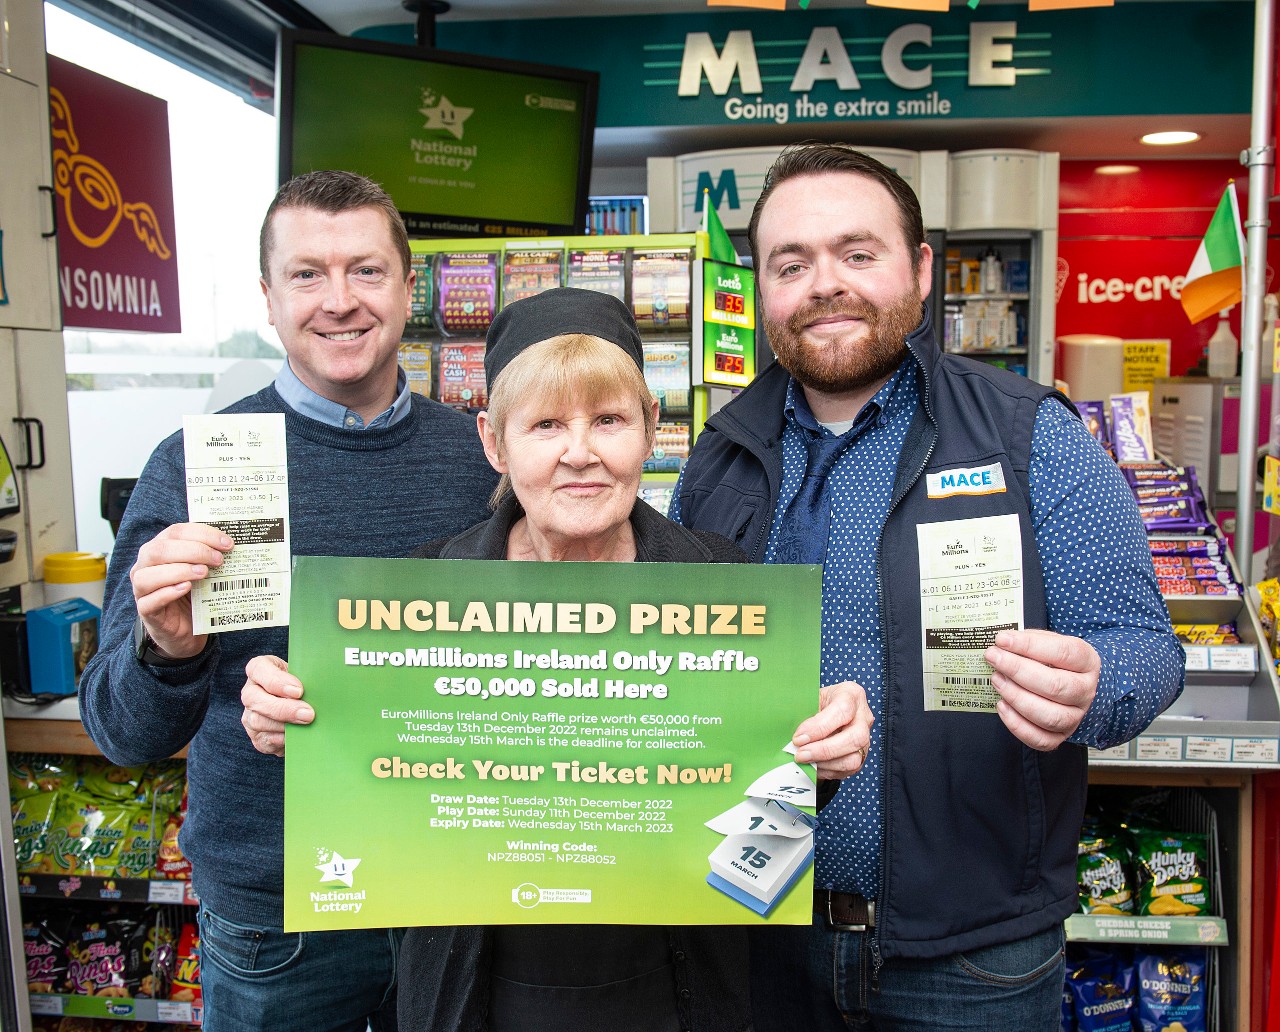 Free Pic No Repro Fee 13 03 2023Sheila O'Driscoll,  Fergus O’Hare  store manager  and Martin DrummeyNational Lottery  O’Hare’s Mace, Turners Cross, Cork.Photography By Gerard McCarthy / Mac Innes Photography .